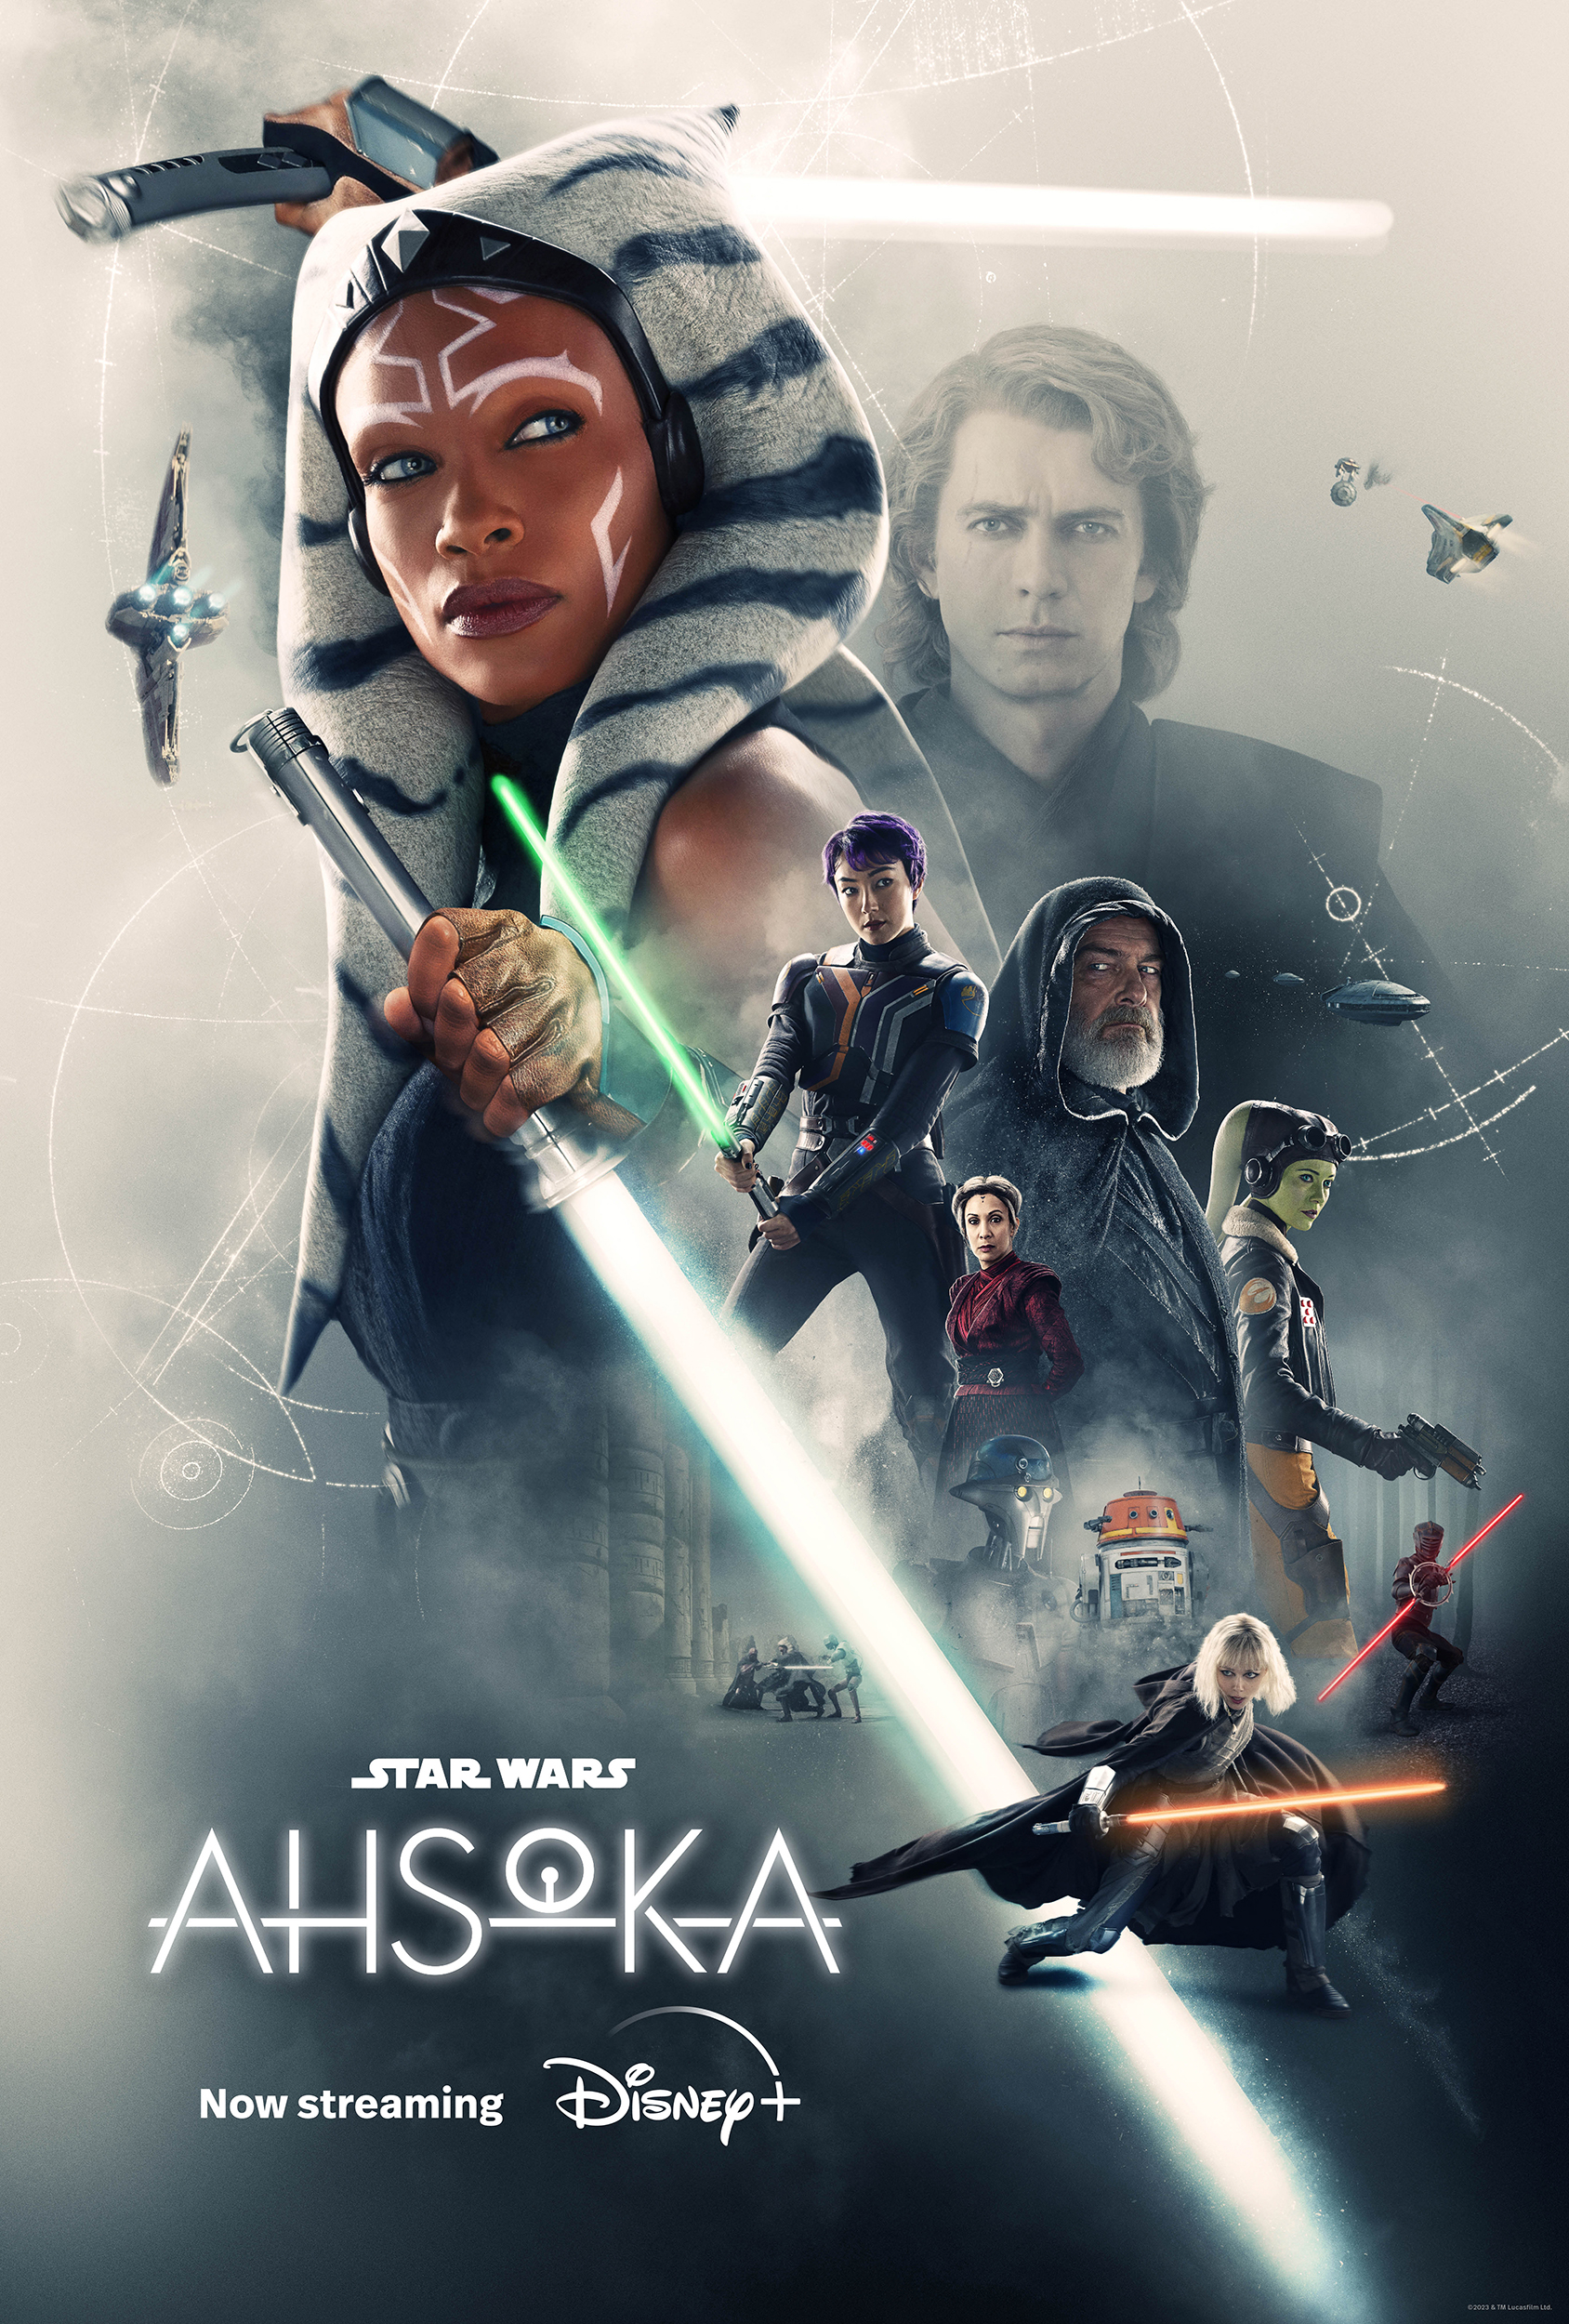 Star Wars: The Rise of Skywalker Character Posters Revealed